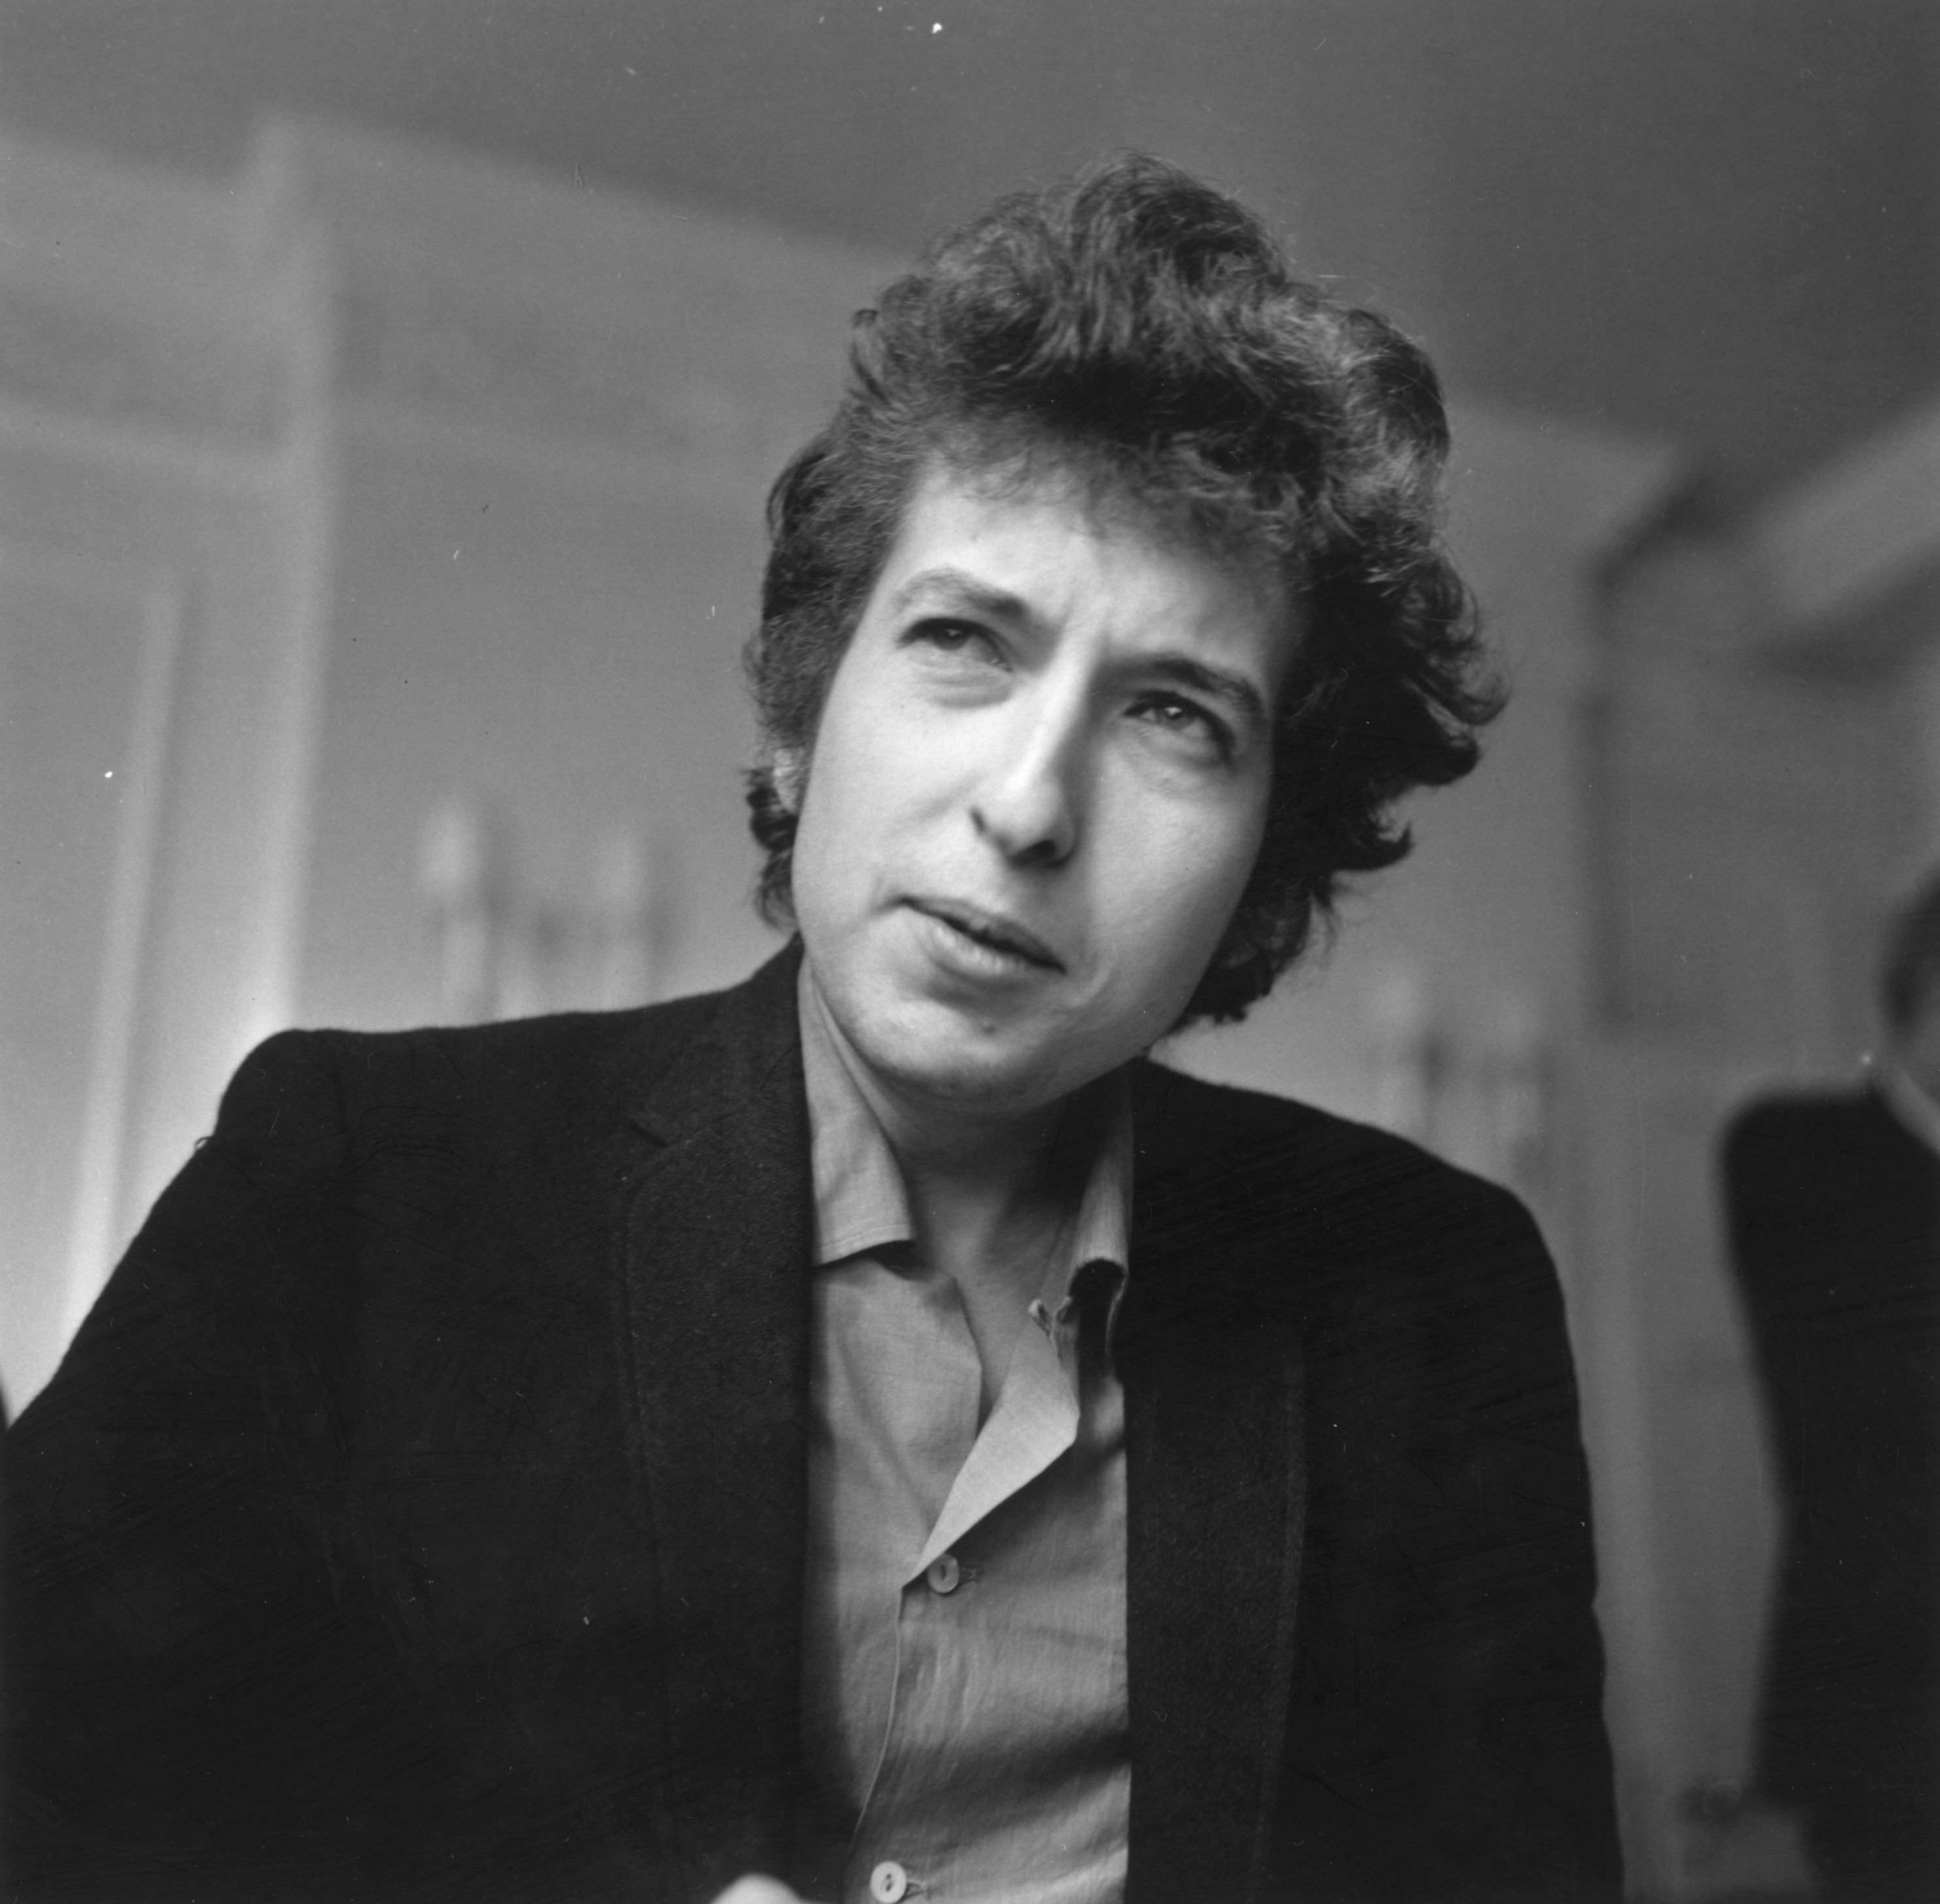 Bob Dylan in front of a wall